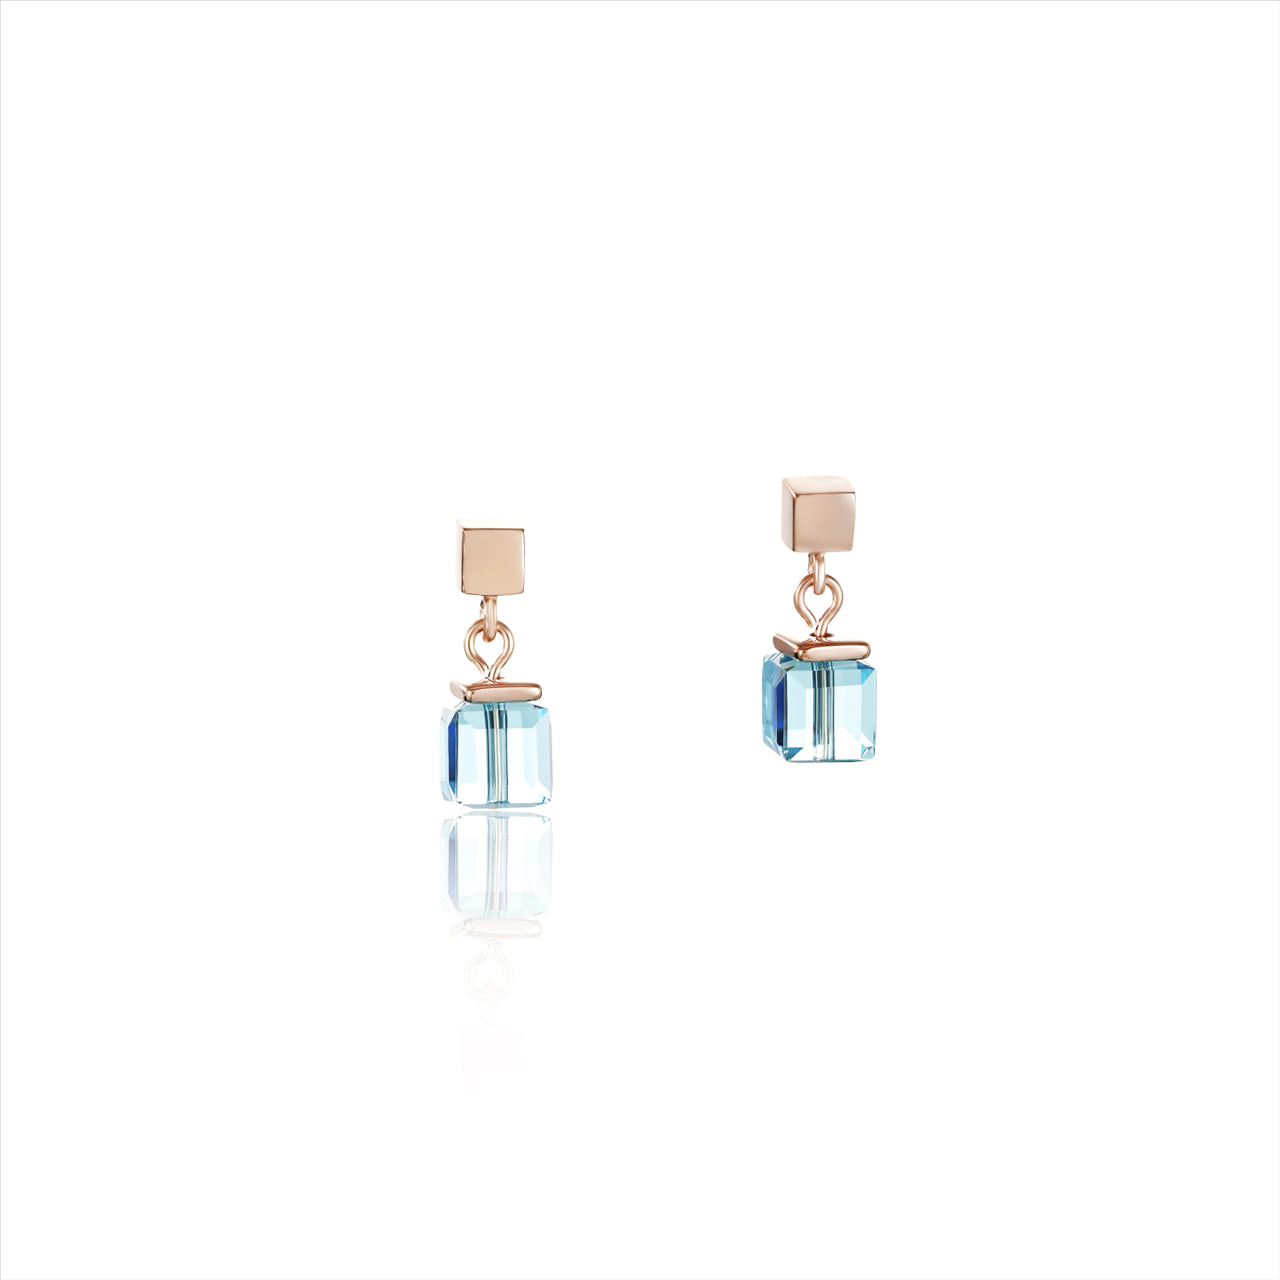 Earrings - CDL - rose gold plated stainless steel with aquamarine blue Swarovski crystals & sterling silver fittings